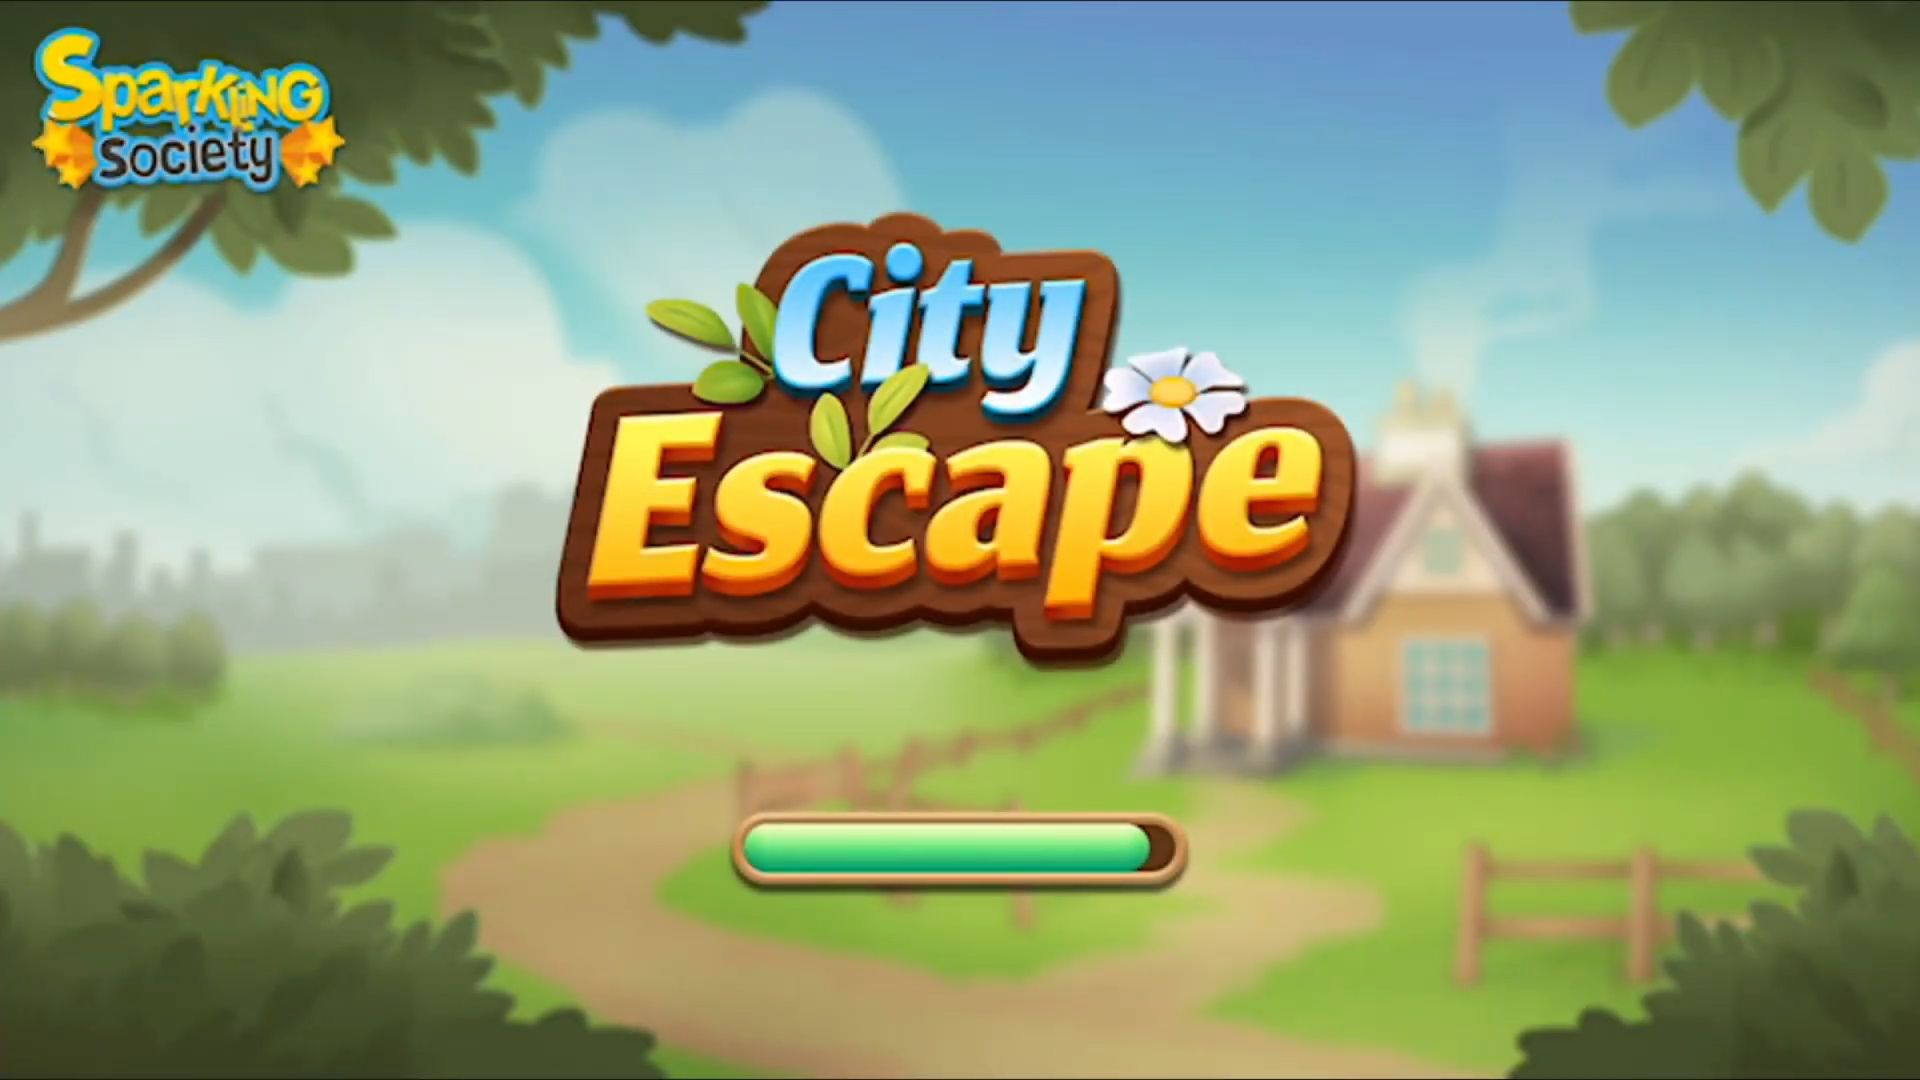 Full version of Android Logic game apk City Escape Garden Blast Story for tablet and phone.